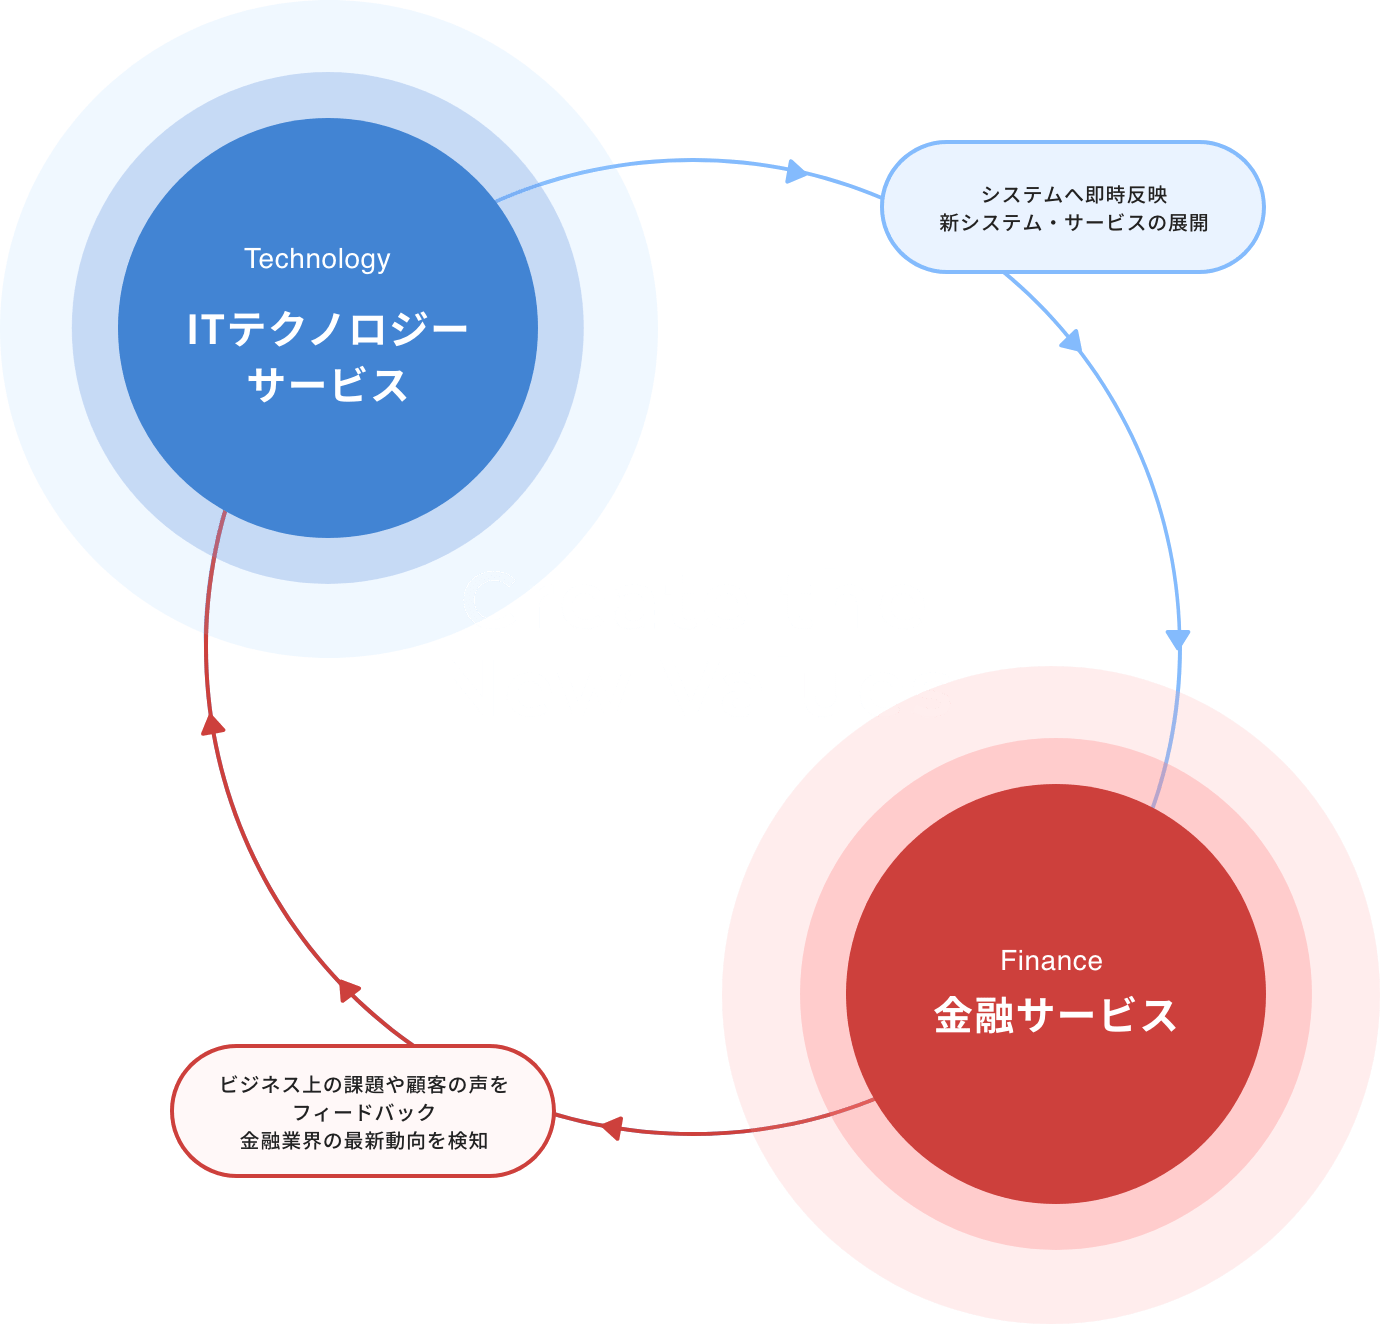 Create the New Values